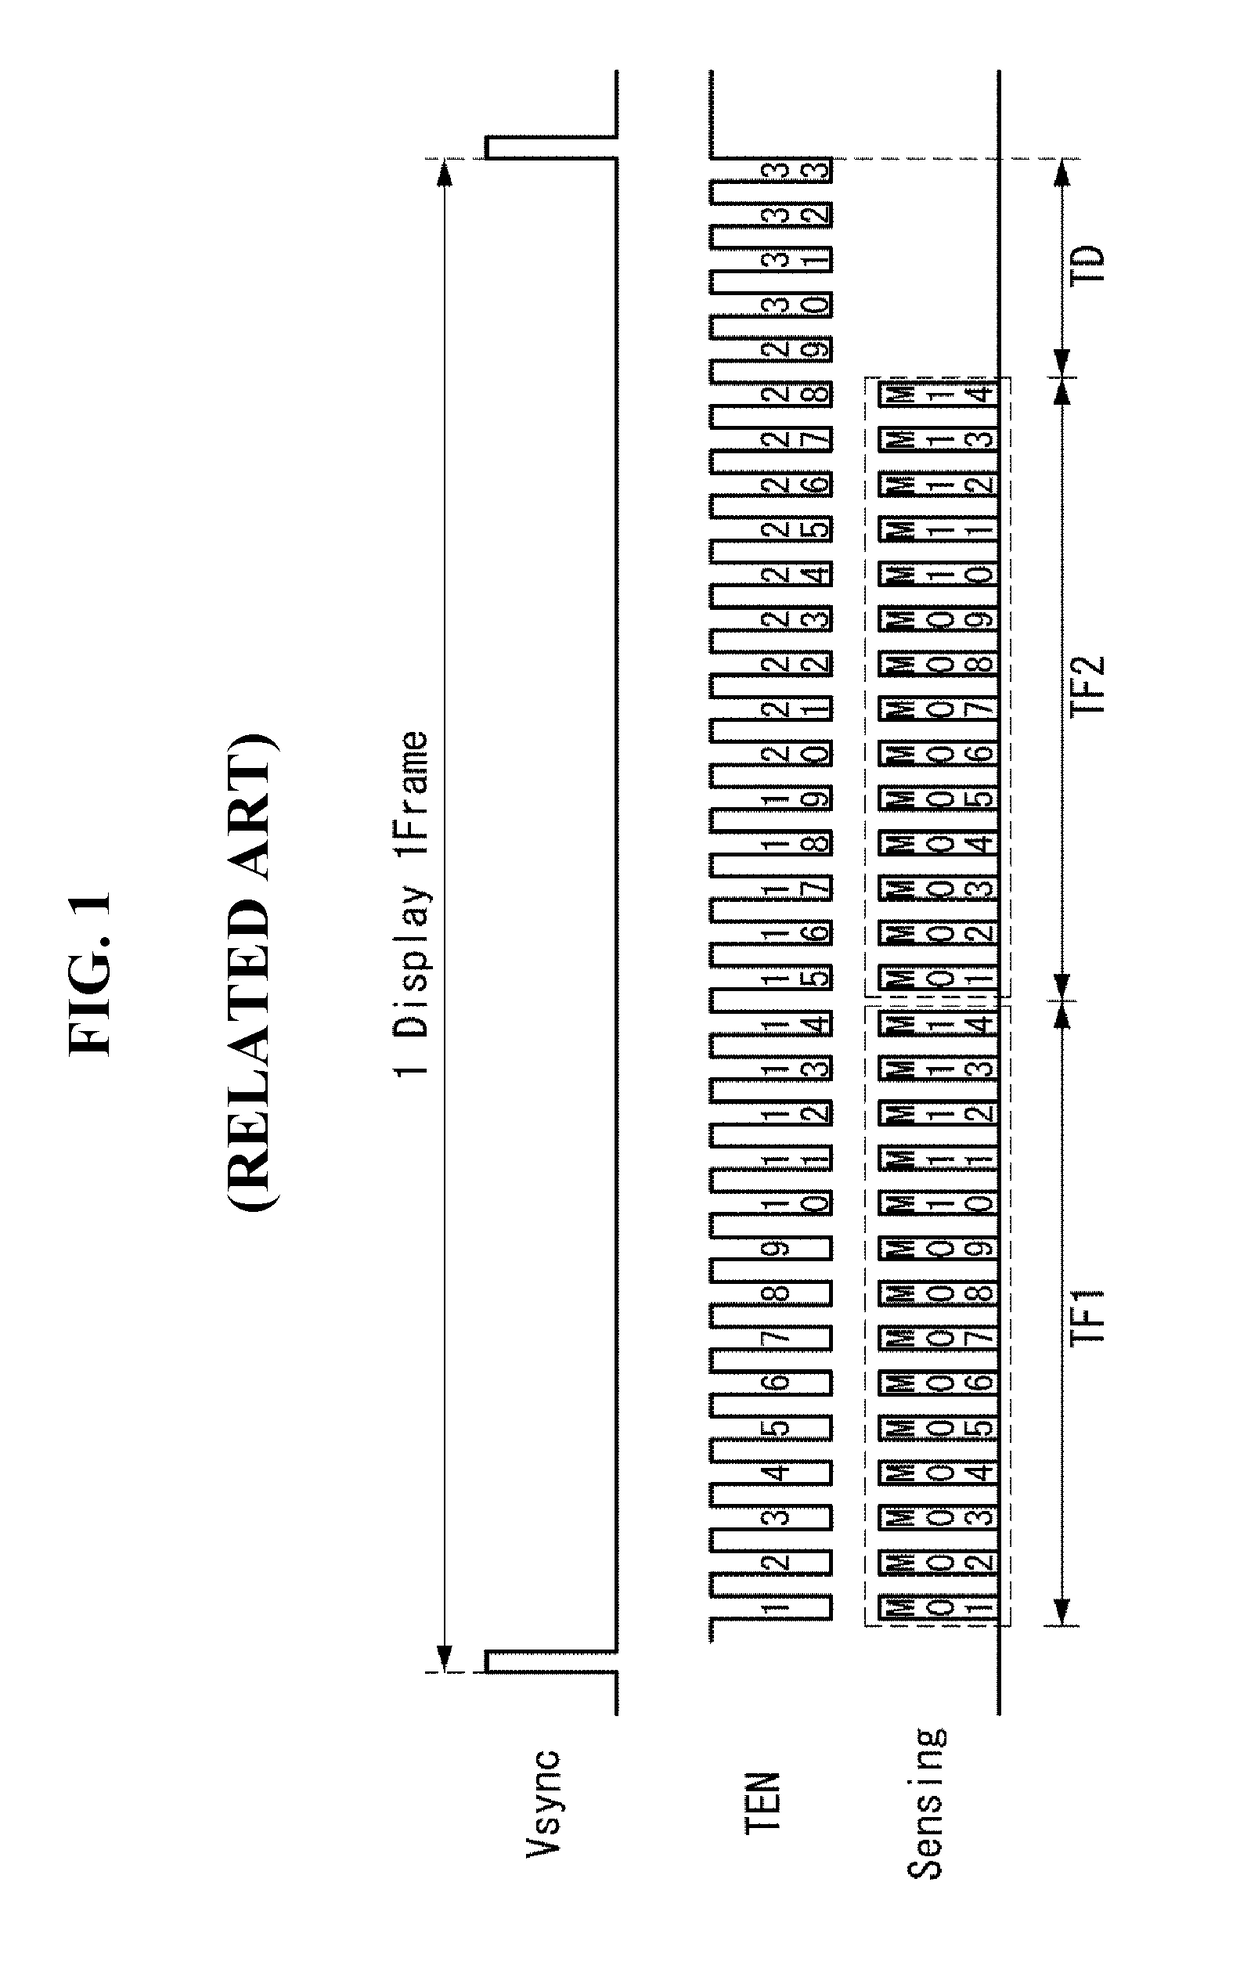 Display device, method for driving the same, and driving circuit thereof